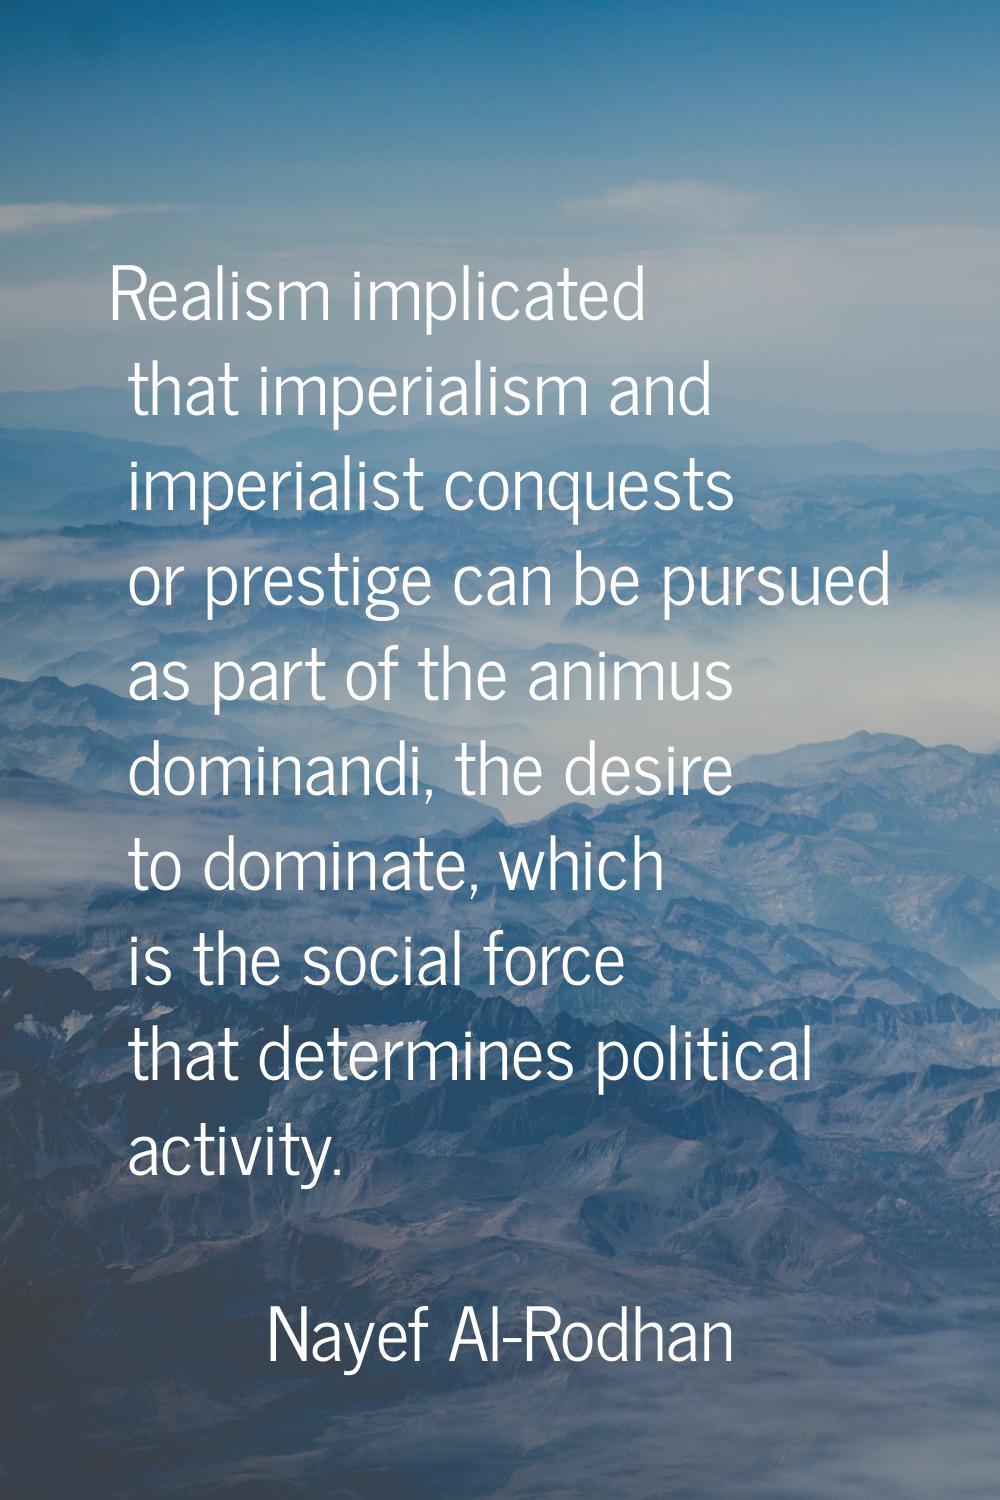 Realism implicated that imperialism and imperialist conquests or prestige can be pursued as part of